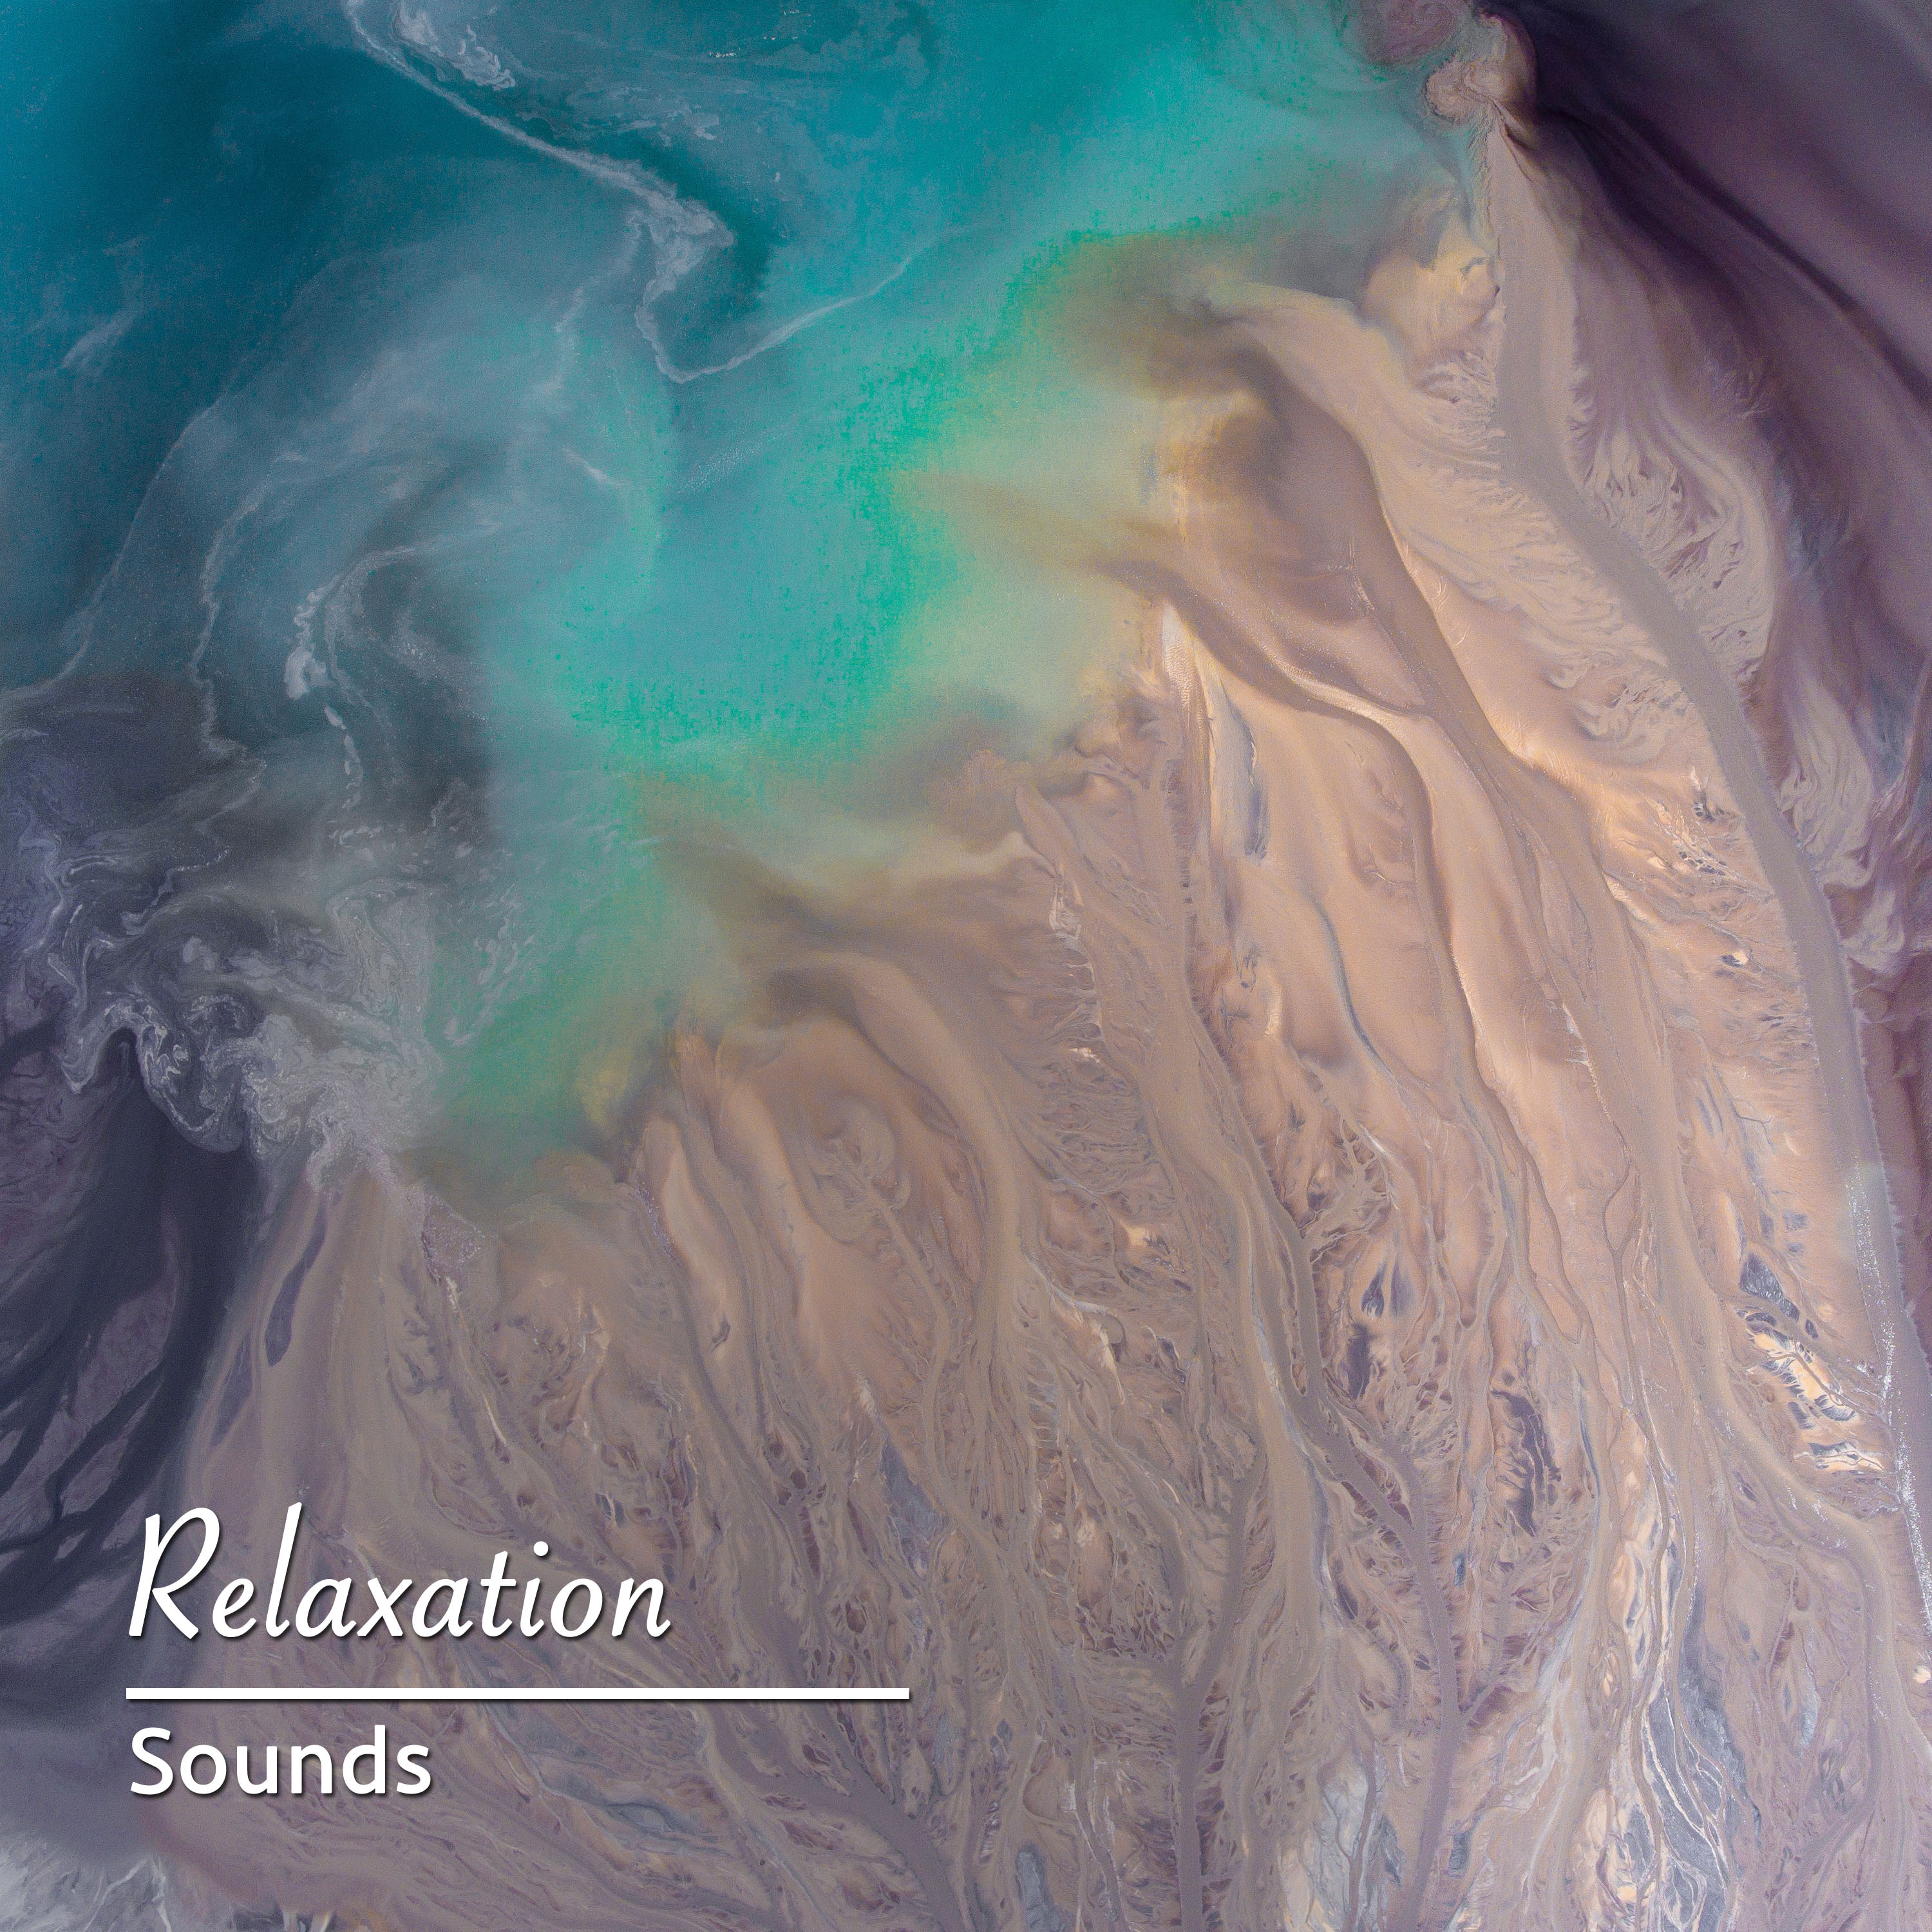 #2018 Relaxation Sounds to Aid Wellness & Chakras